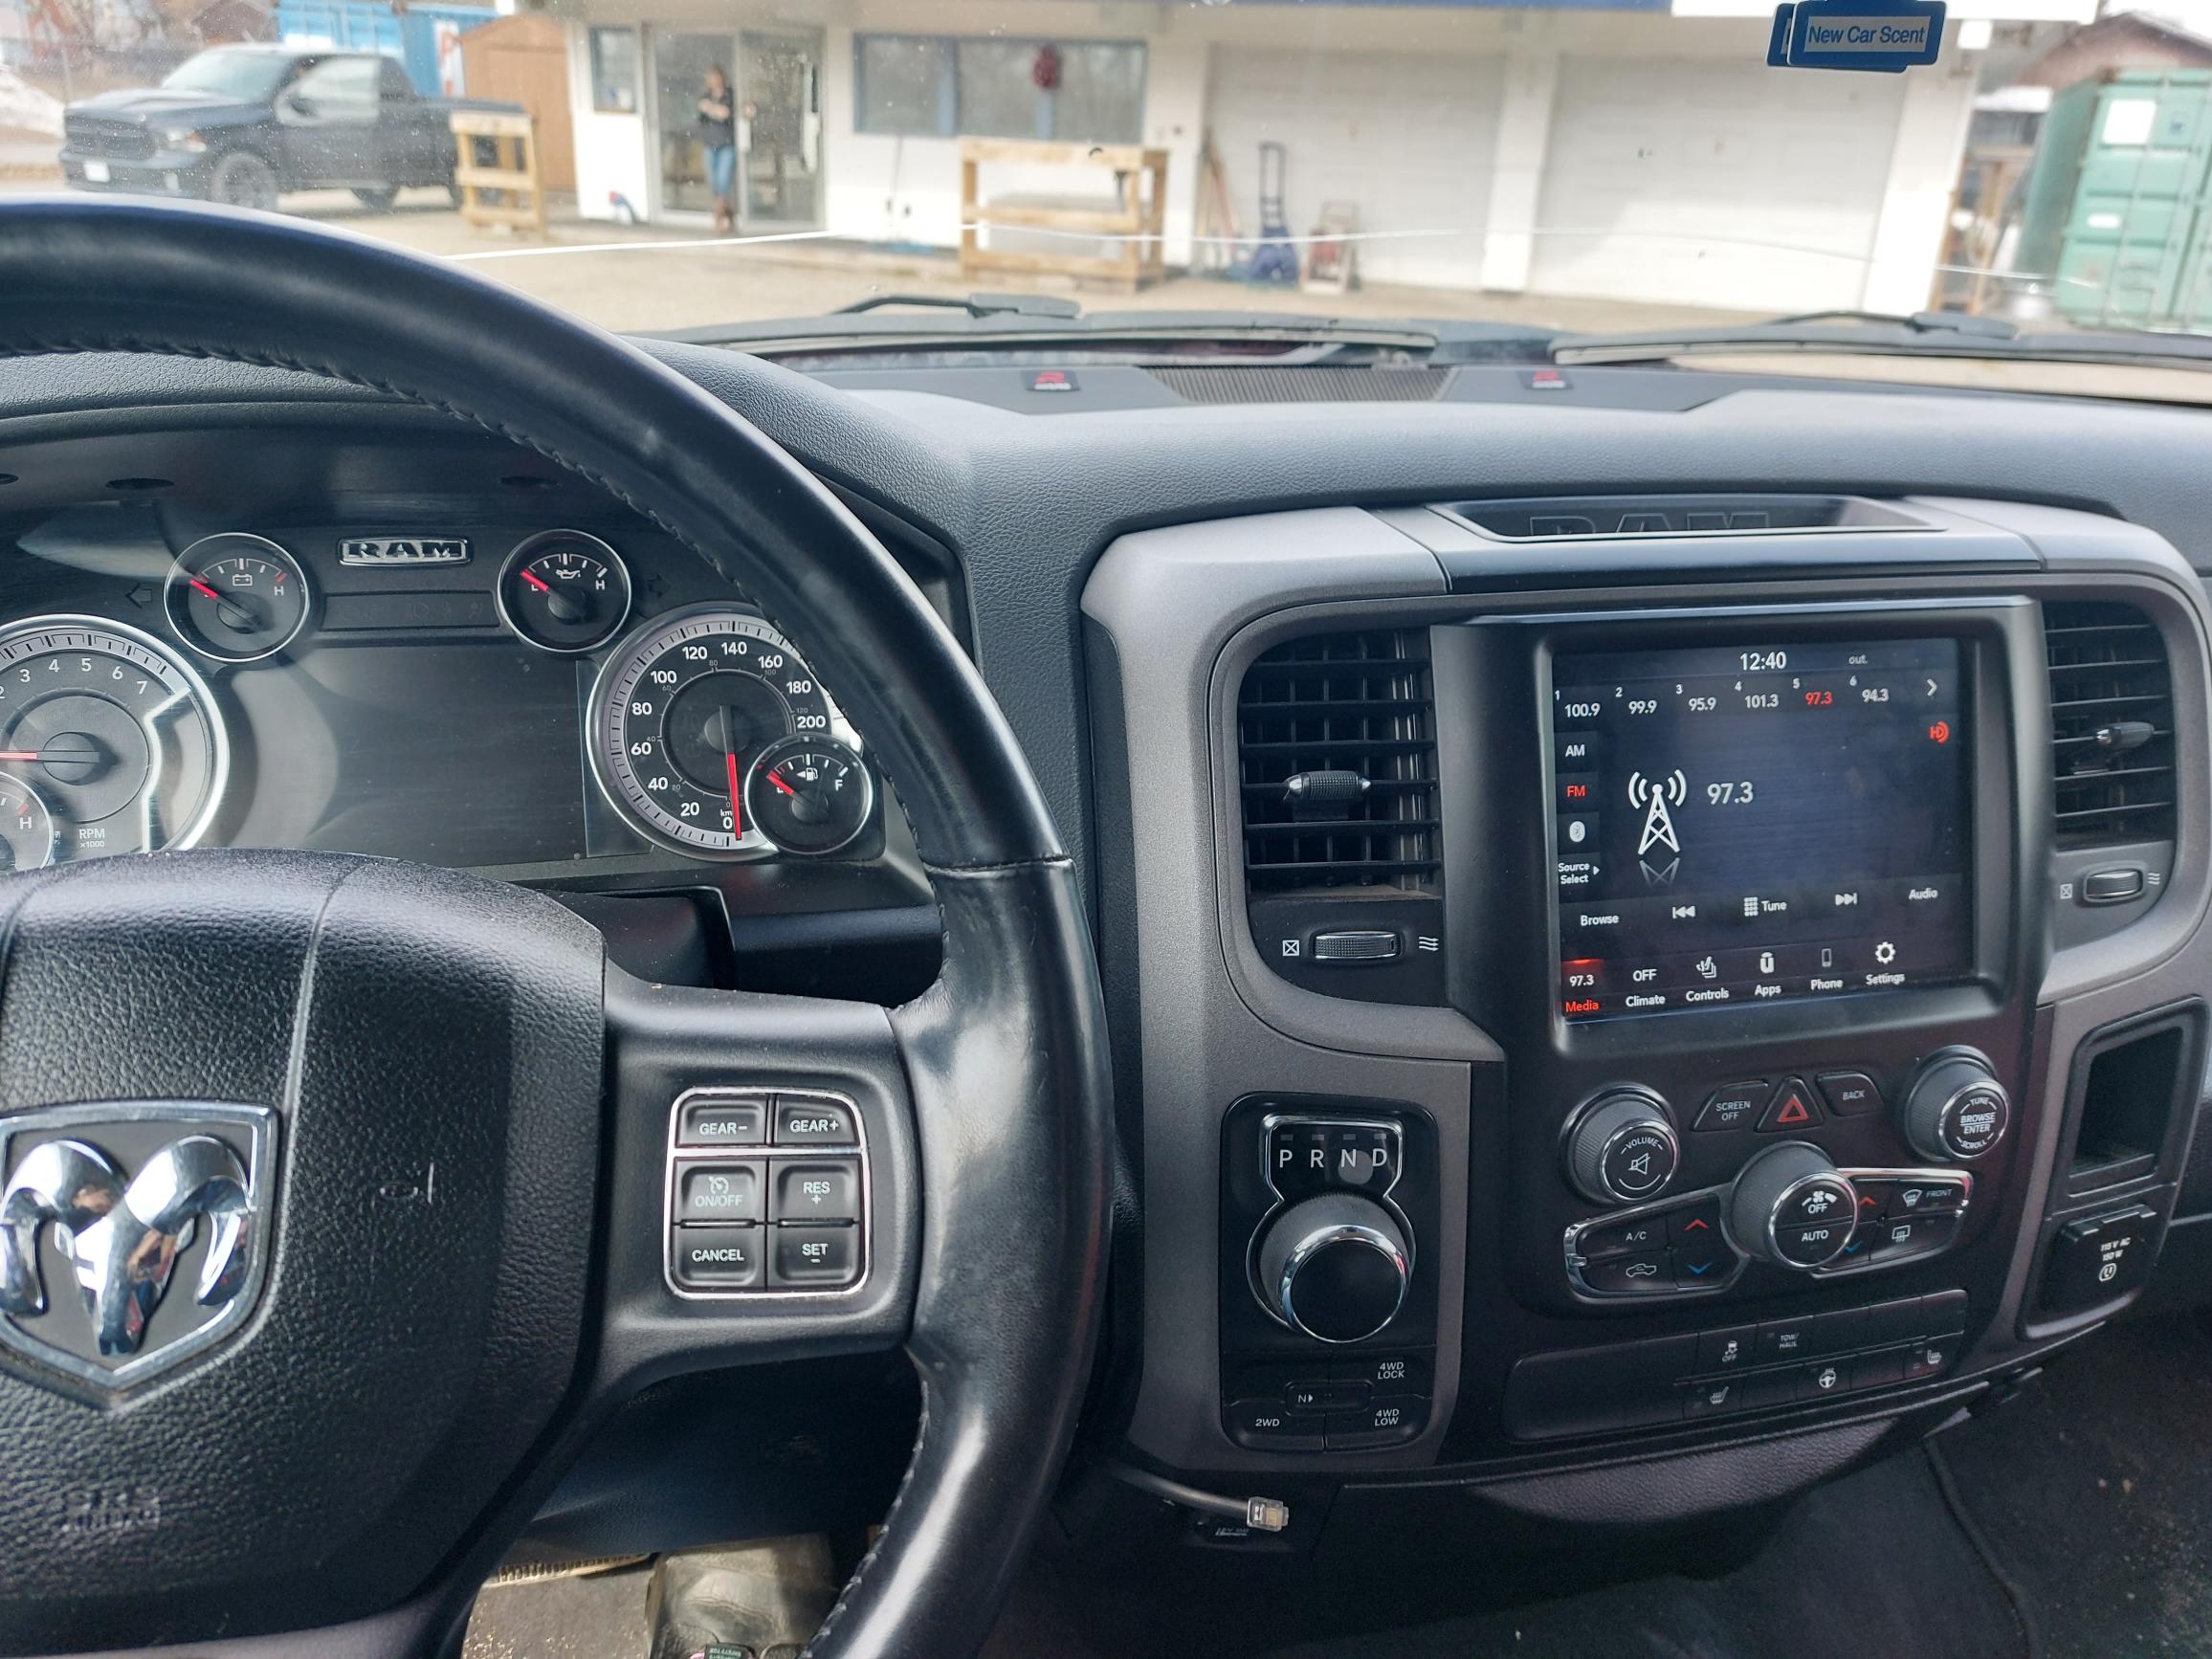 2019* Dodge Ram 1500 B-PG-0768 Located in Prince George